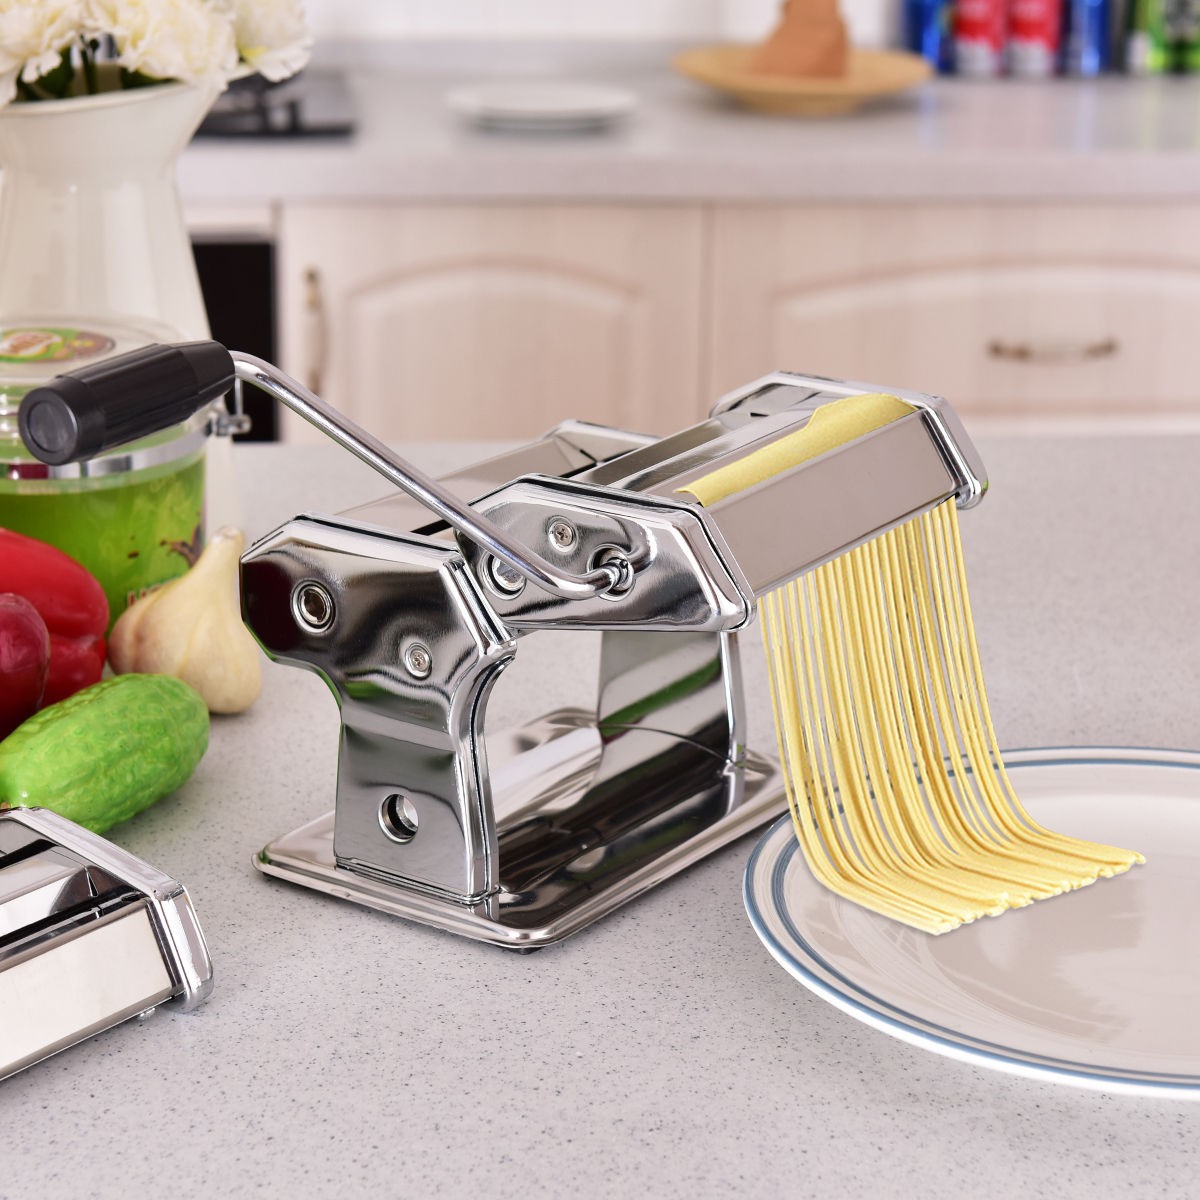 5 In 1 Stainless Steel Pasta Maker